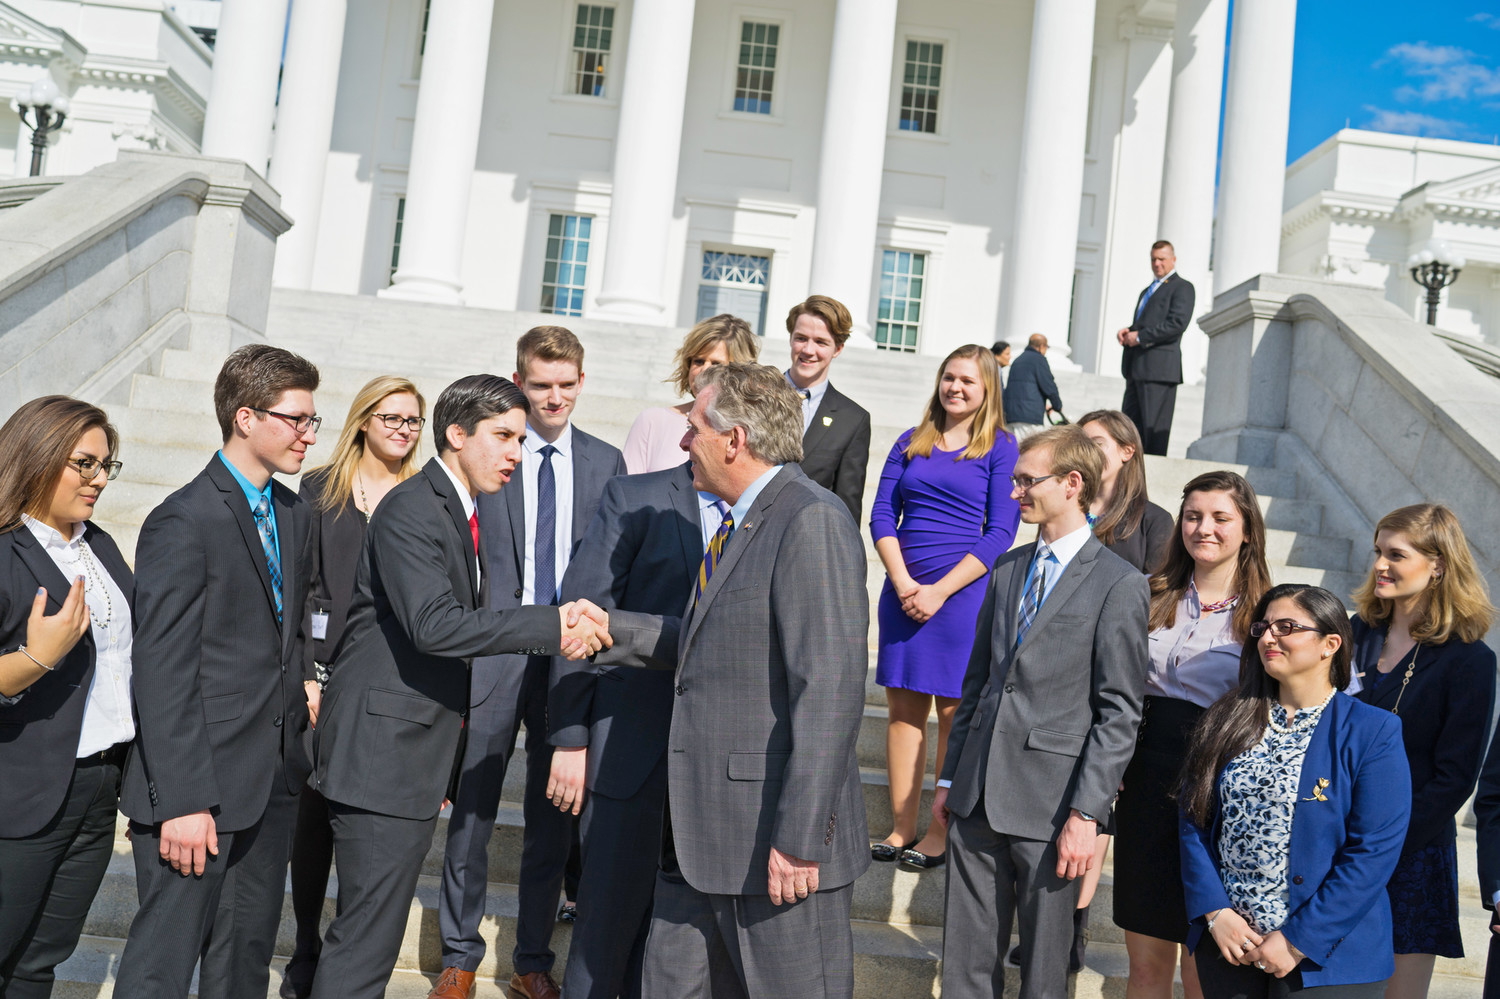 233722-Student-Government-Association-Lobby-Day-in-Richmond-1093.jpg